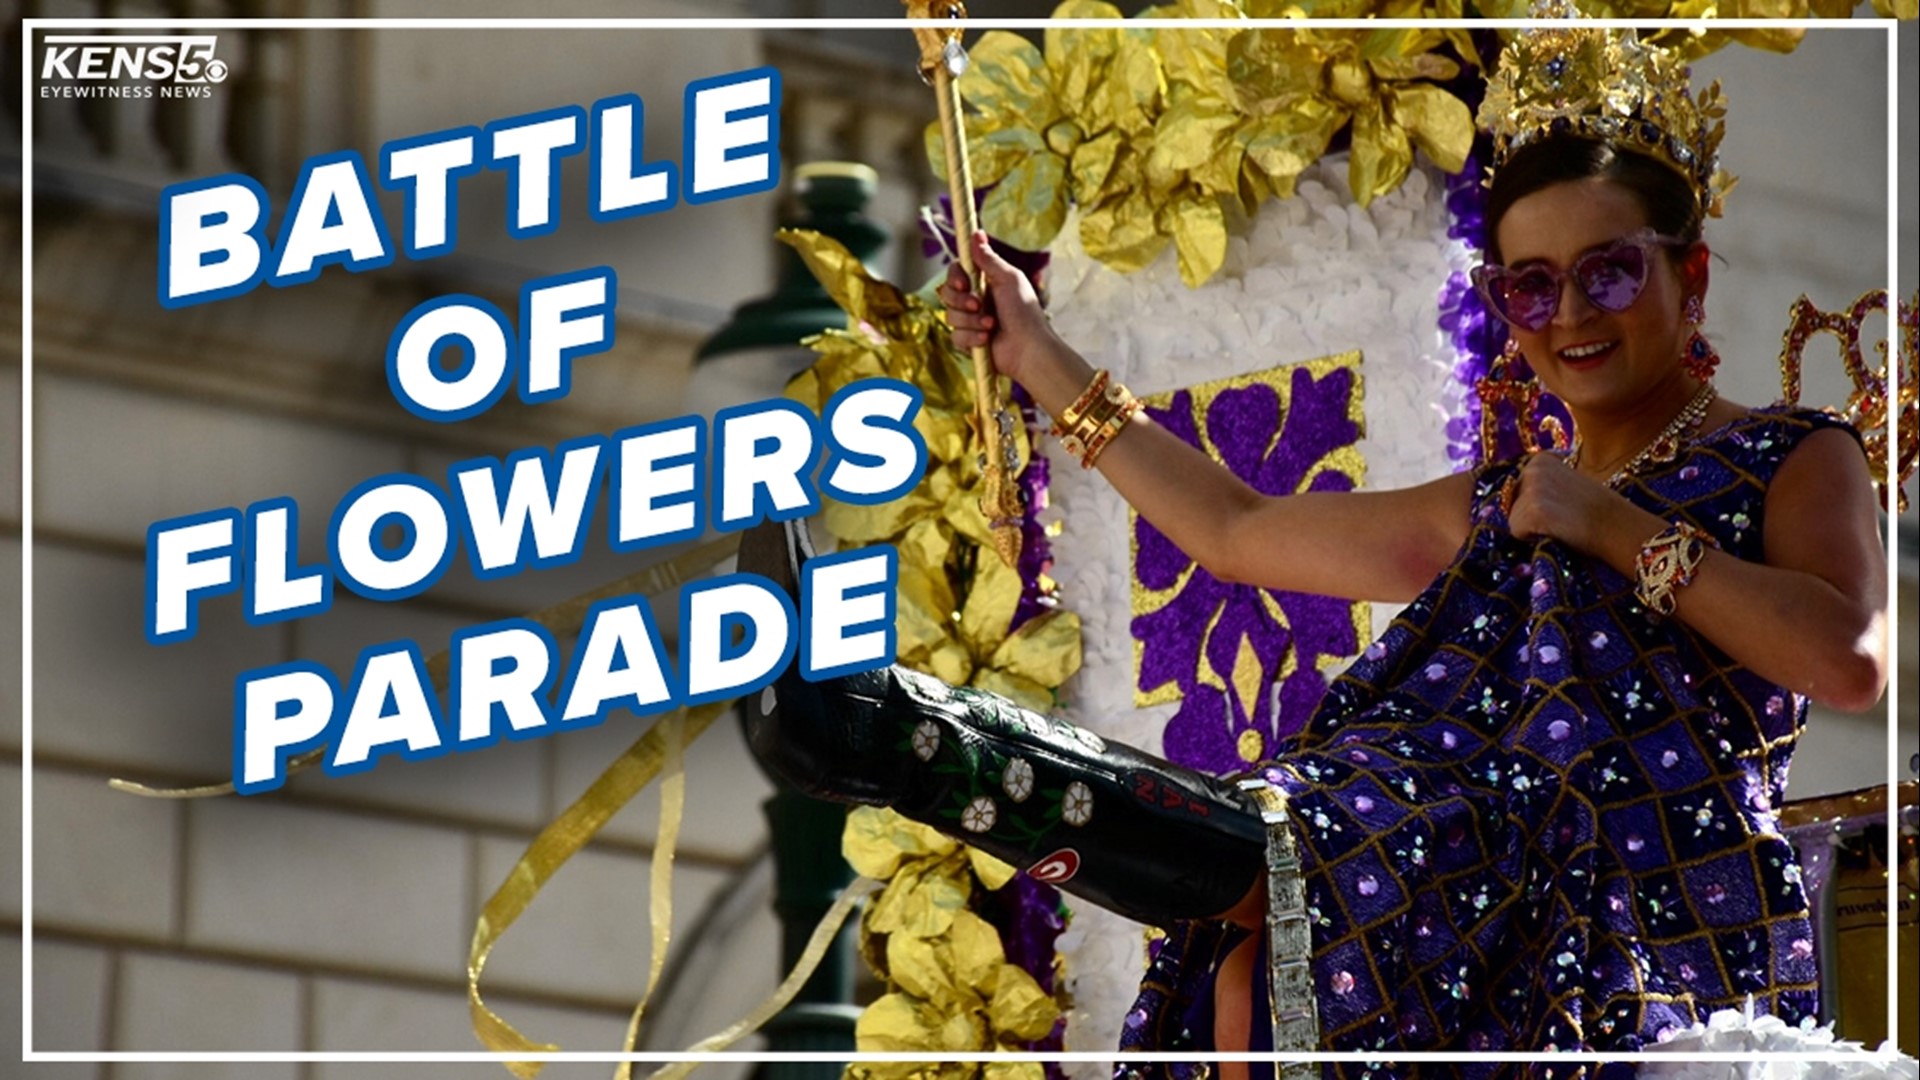 The Battle of Flowers Parade was loaded with fun in San Antonio! What's your favorite Fiesta event?